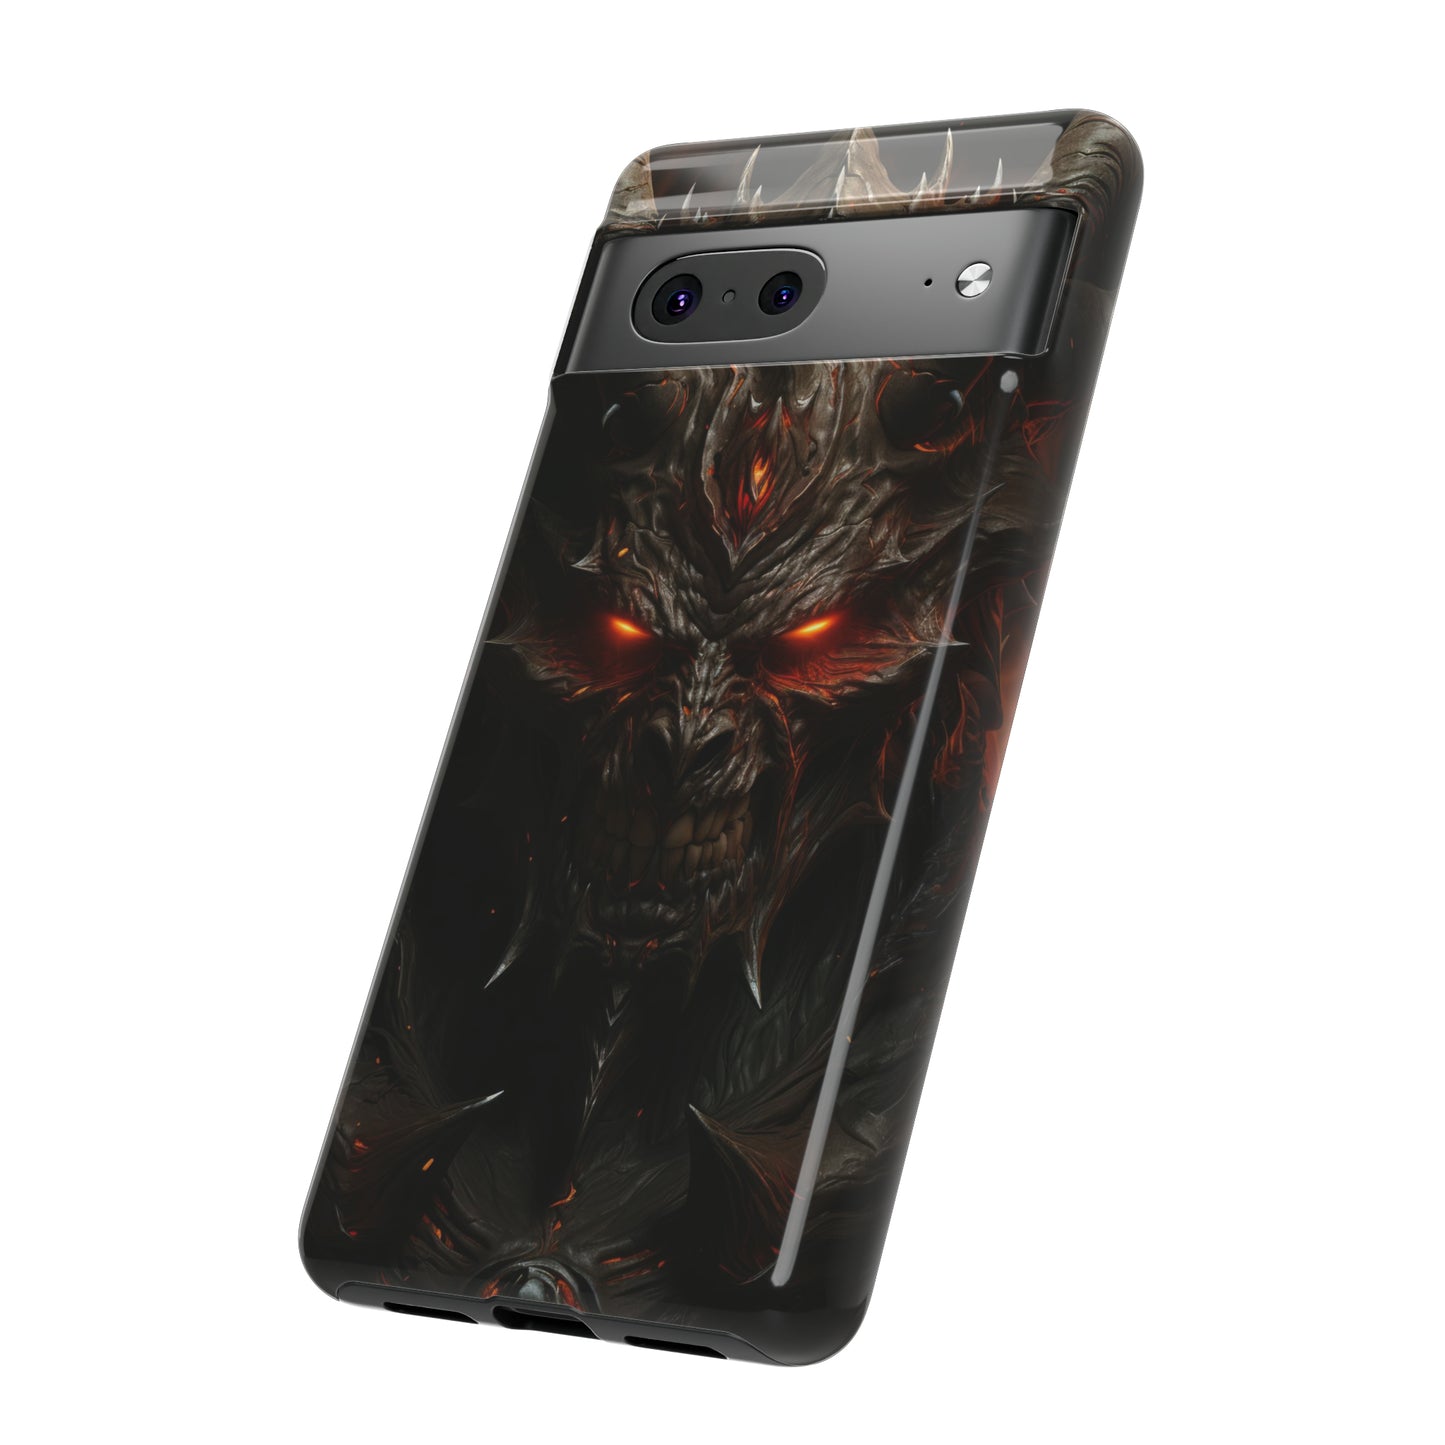 Angry Stone Demon Protective Phone Case - Fiery Gaze Design for iPhone, Samsung, Pixel